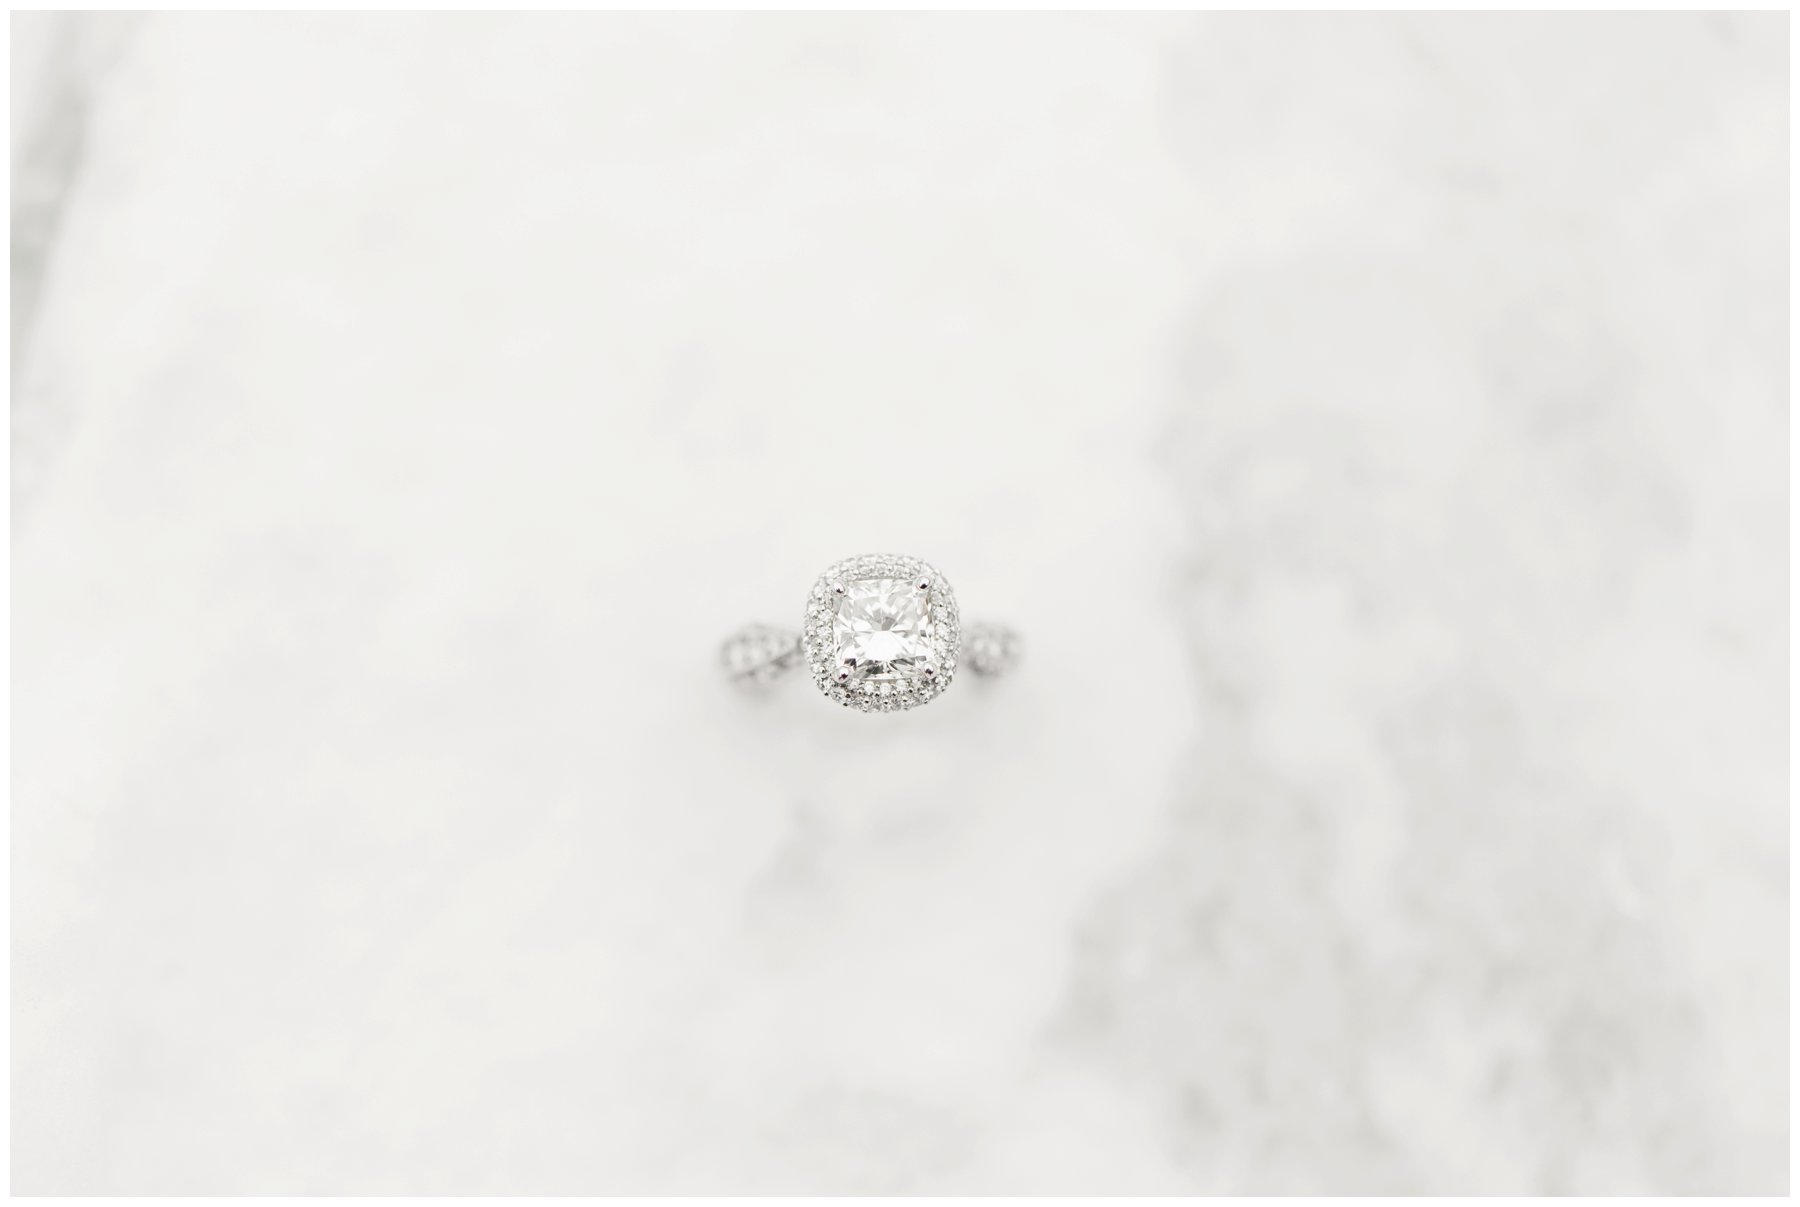 How to plan a surprise proposal? Engagement Ring in snow: The Barnett Company - Ottawa Wedding Photographer